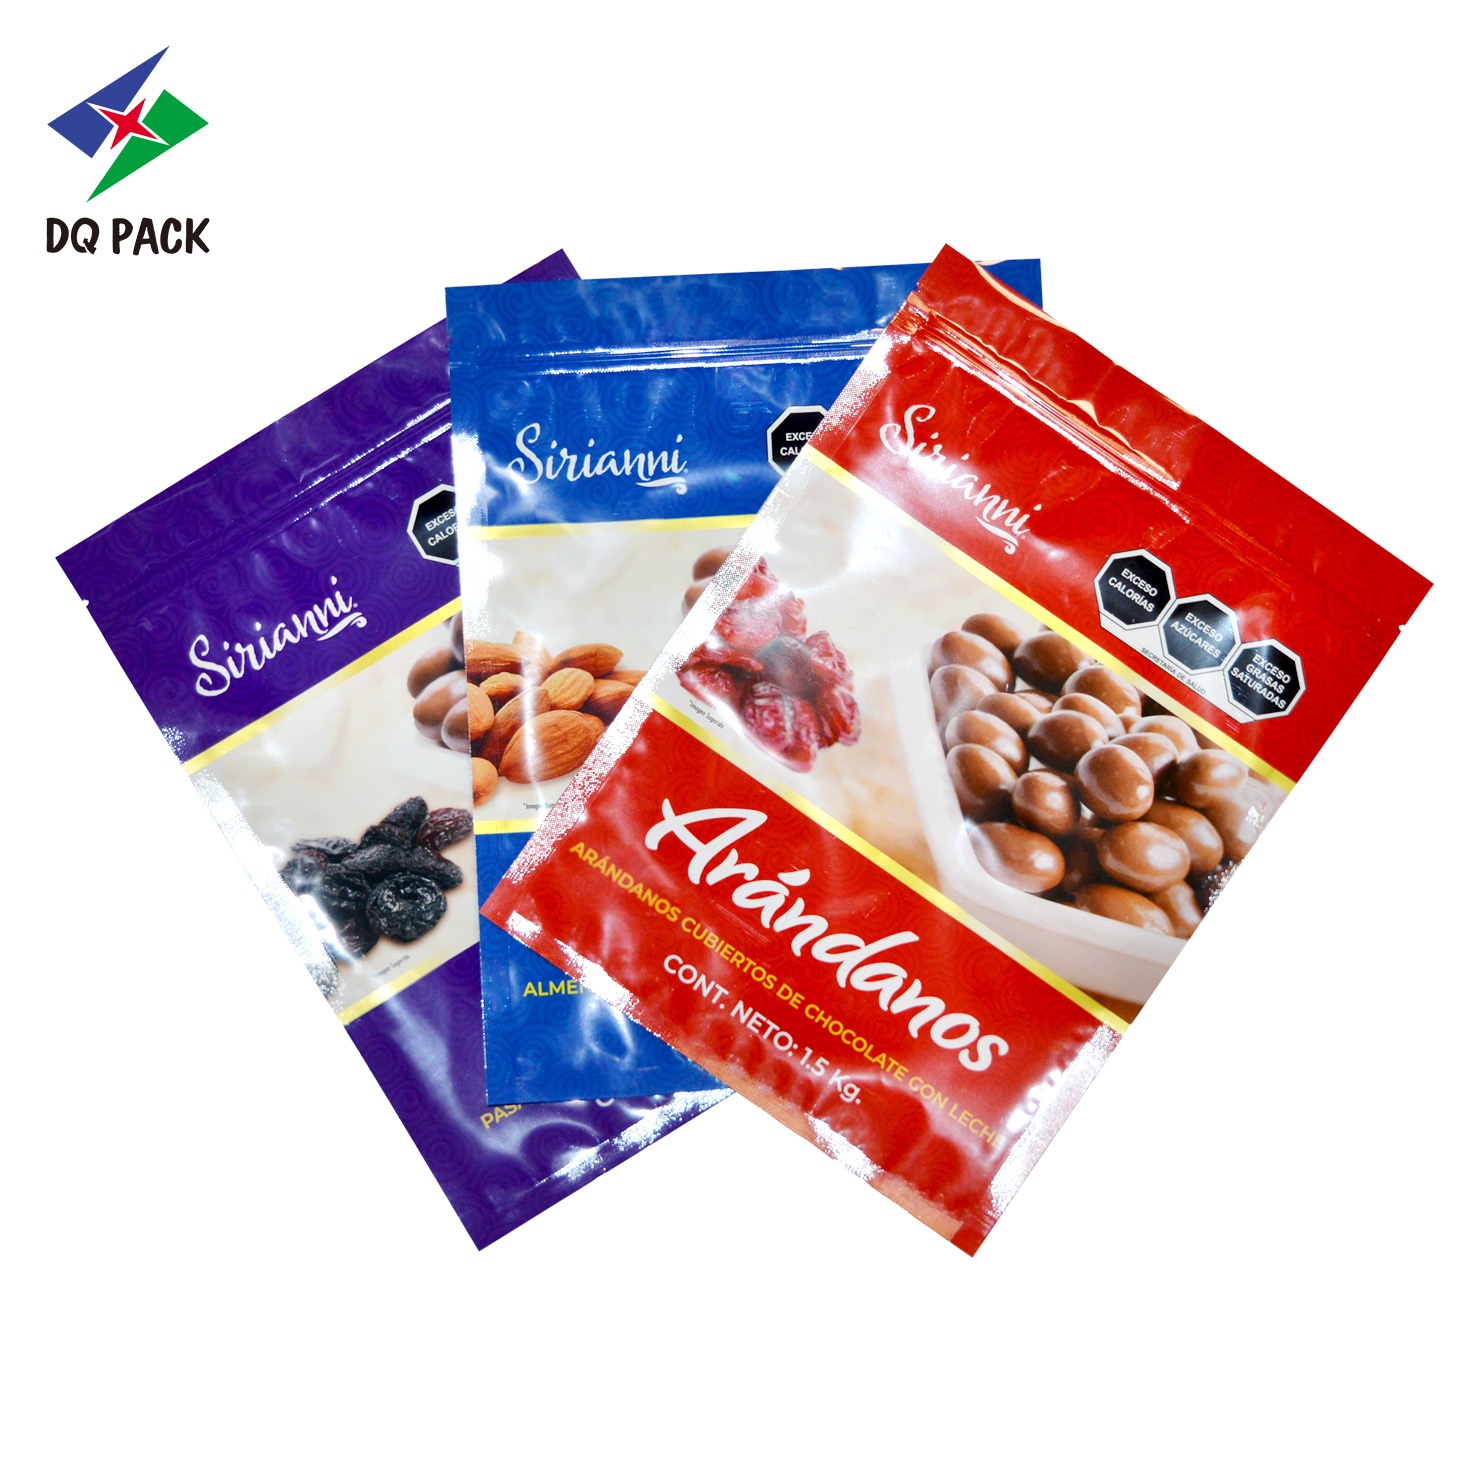 DQ PACK Wholesale Reusable Refill Resealable three side seal pouch zipper ziplock bag for snack candy food packaging